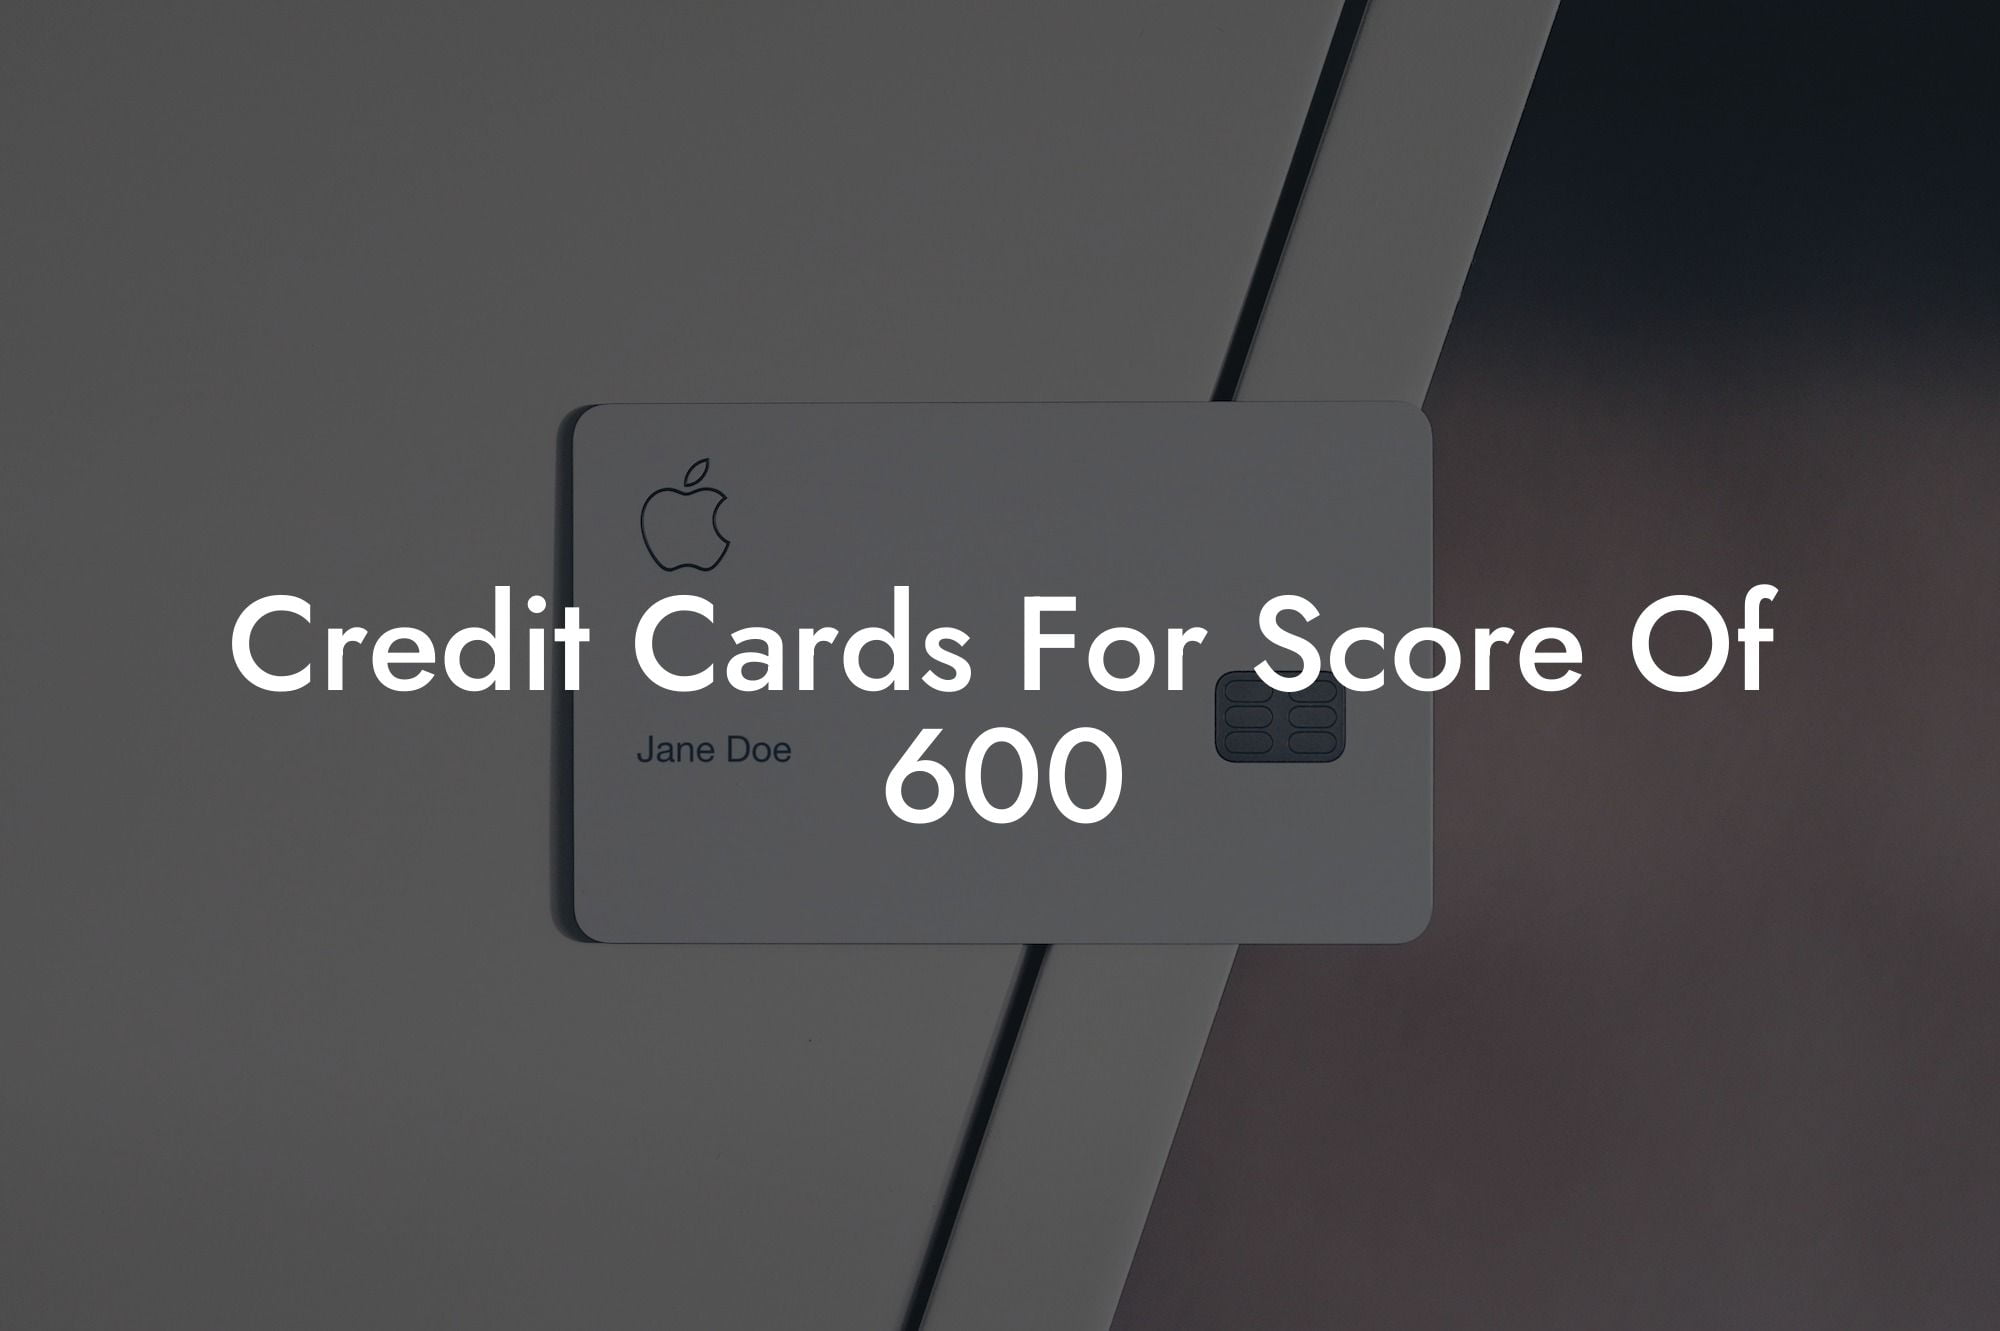 Credit Cards For Score Of 600